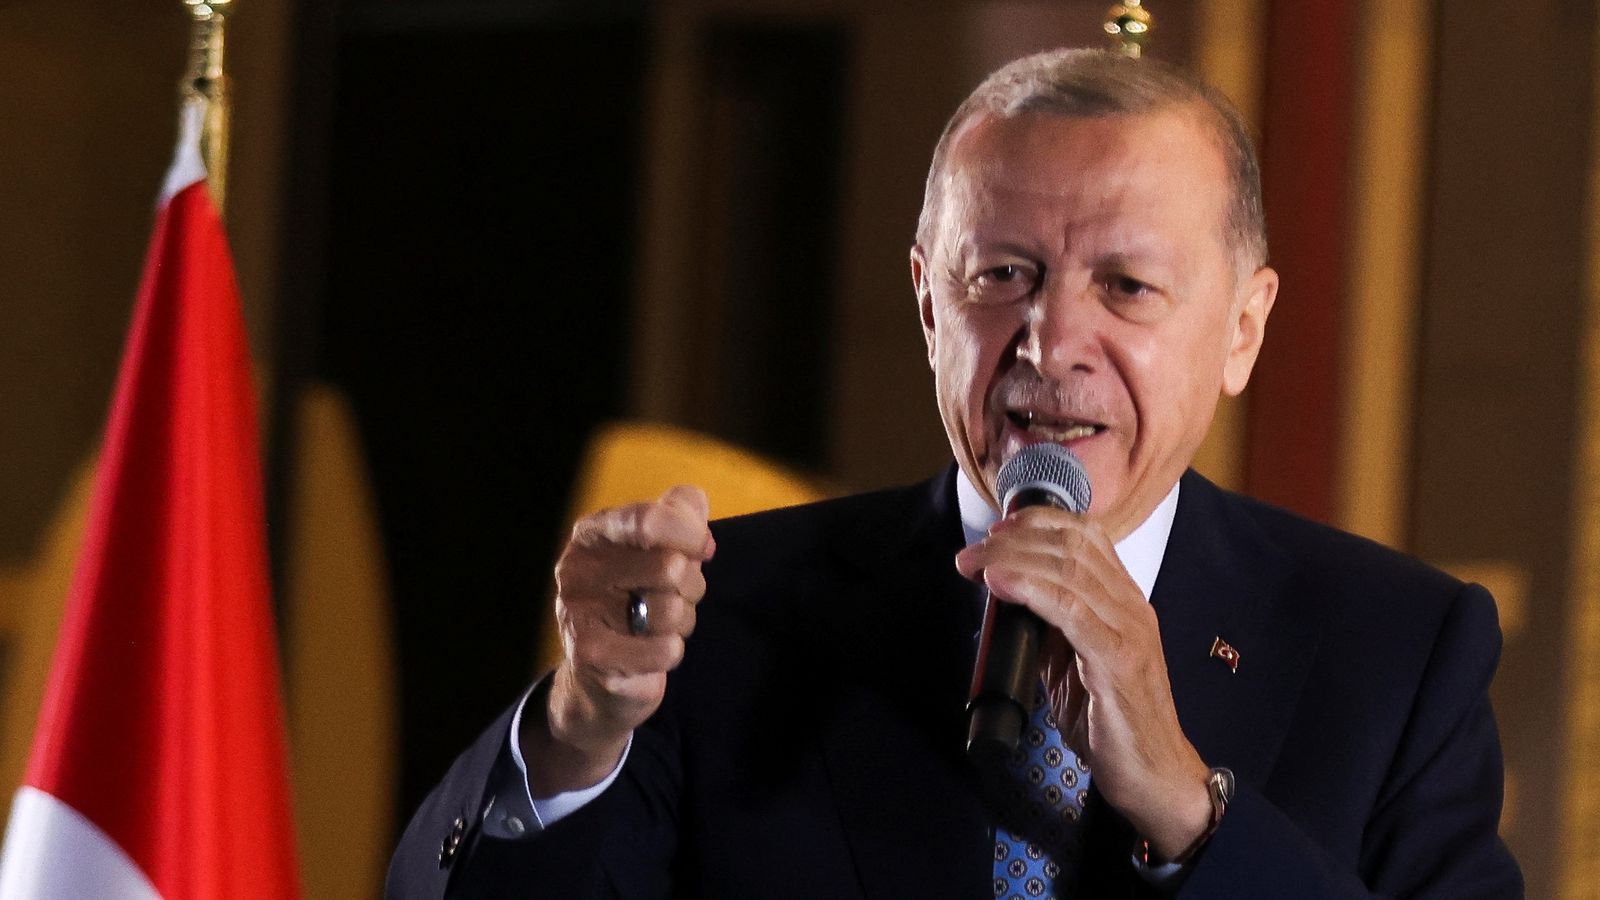 Turkey elections: Putin and Zelenskyy among world leaders to congratulate Erdogan on election victory 